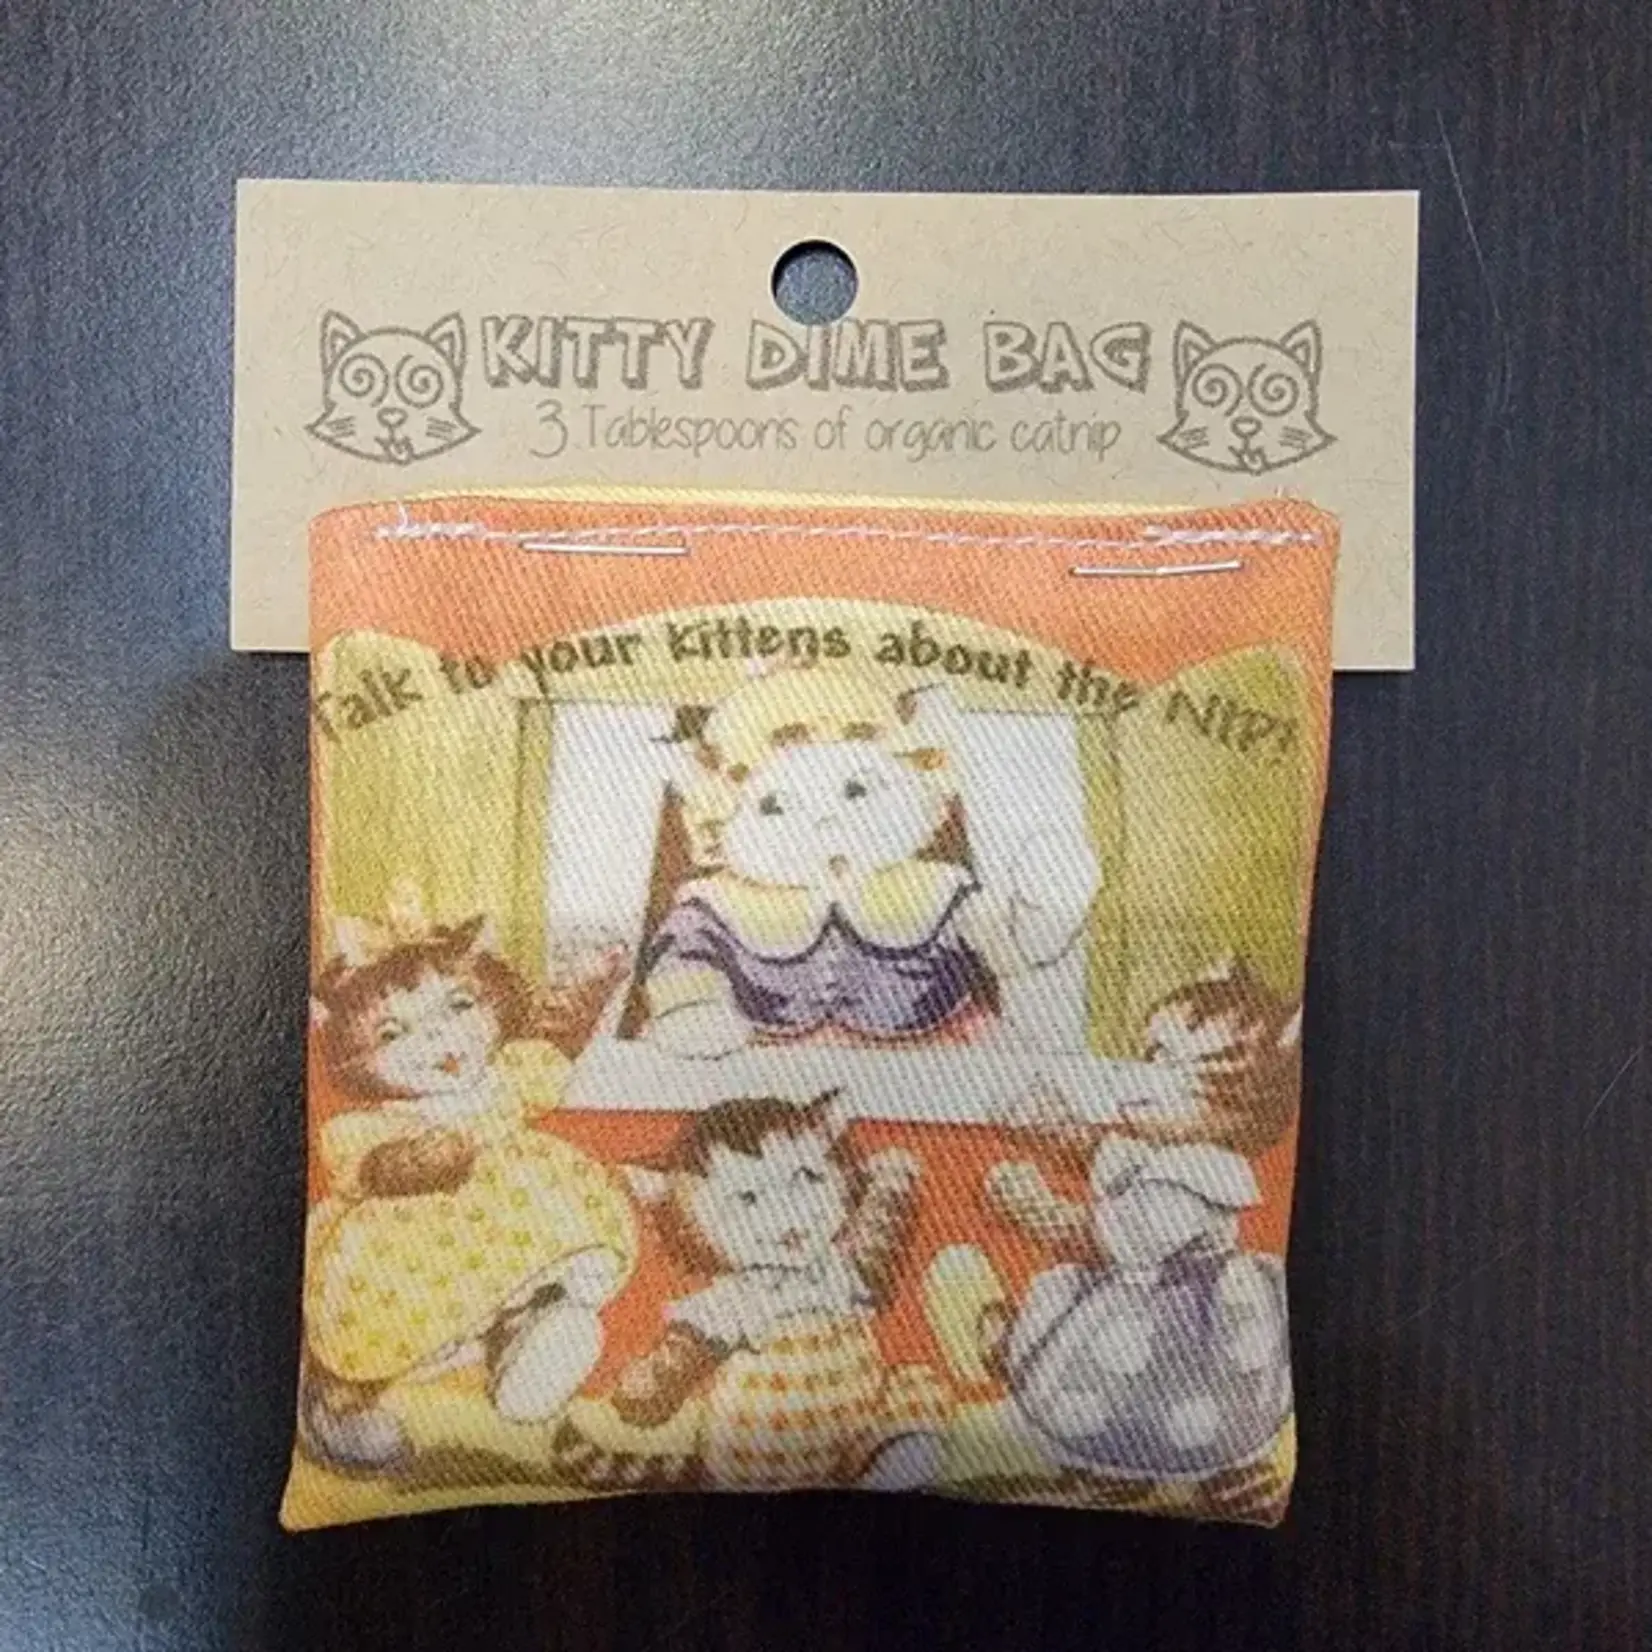 Catnip Pouch - Talk To Your Kittens About The Nip